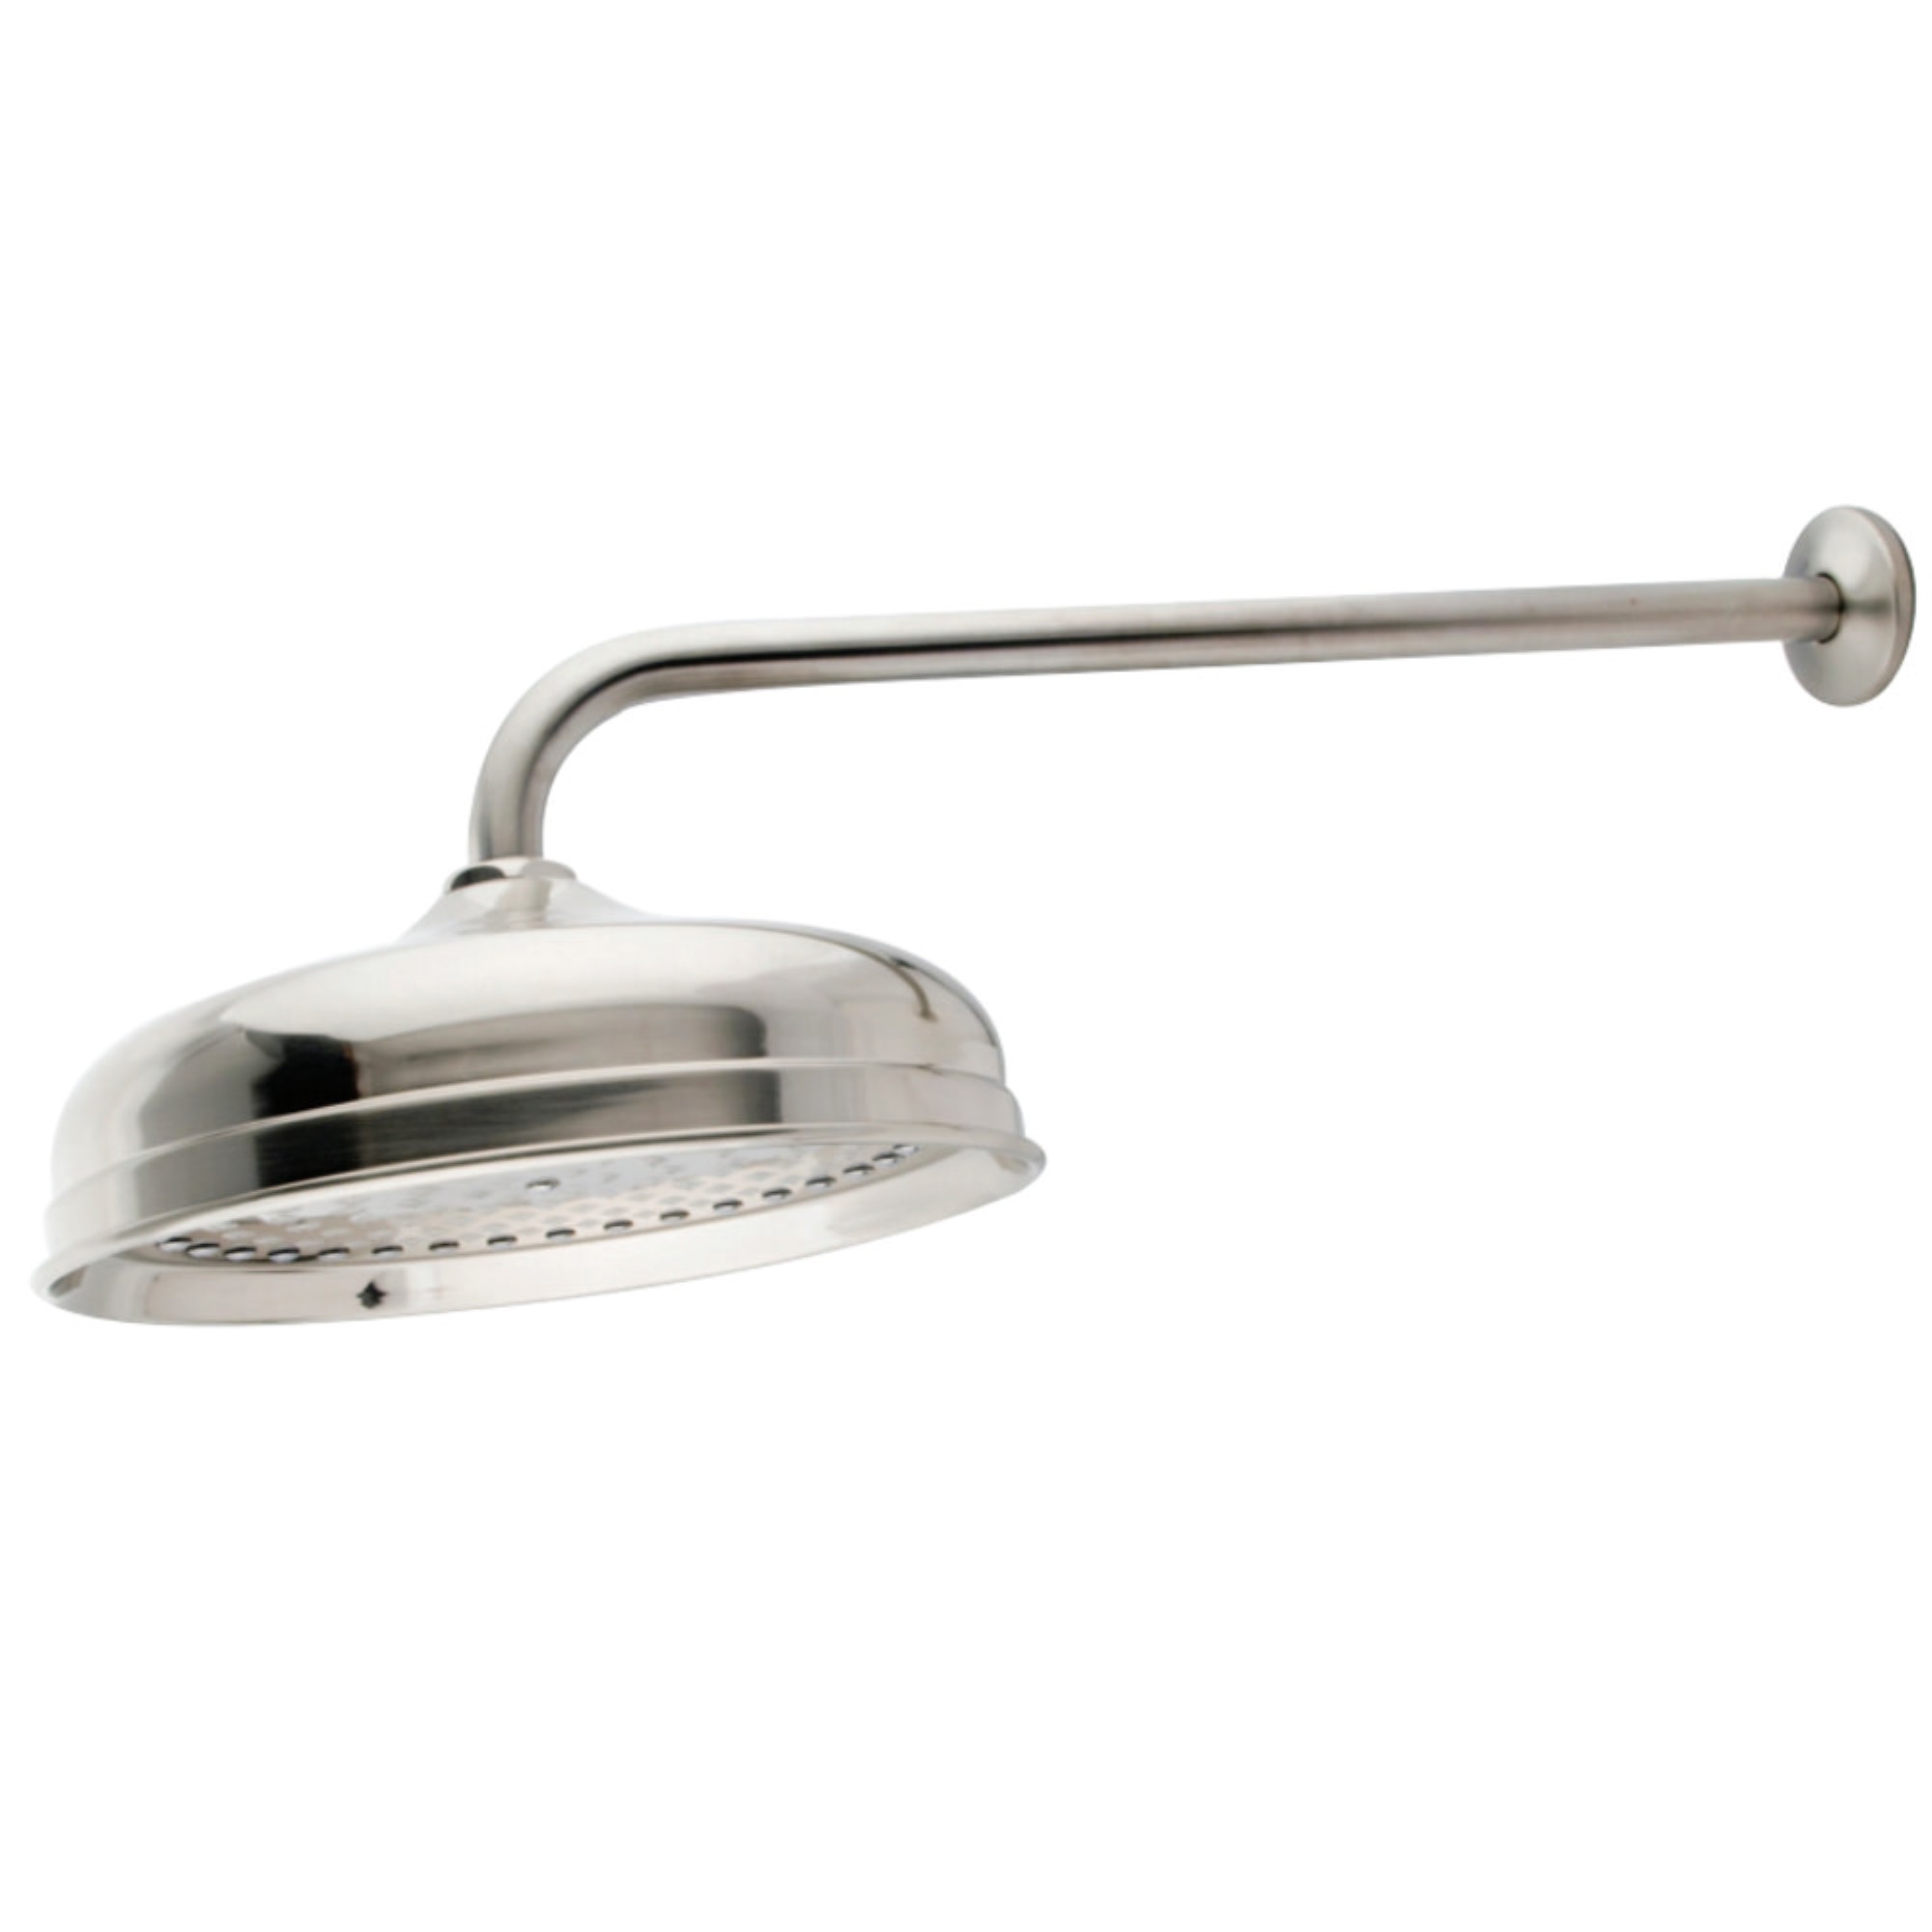 Kingston Brass K225K18 Trimscape 10 in. Showerhead with 17 in. Shower Arm, Brushed Nickel